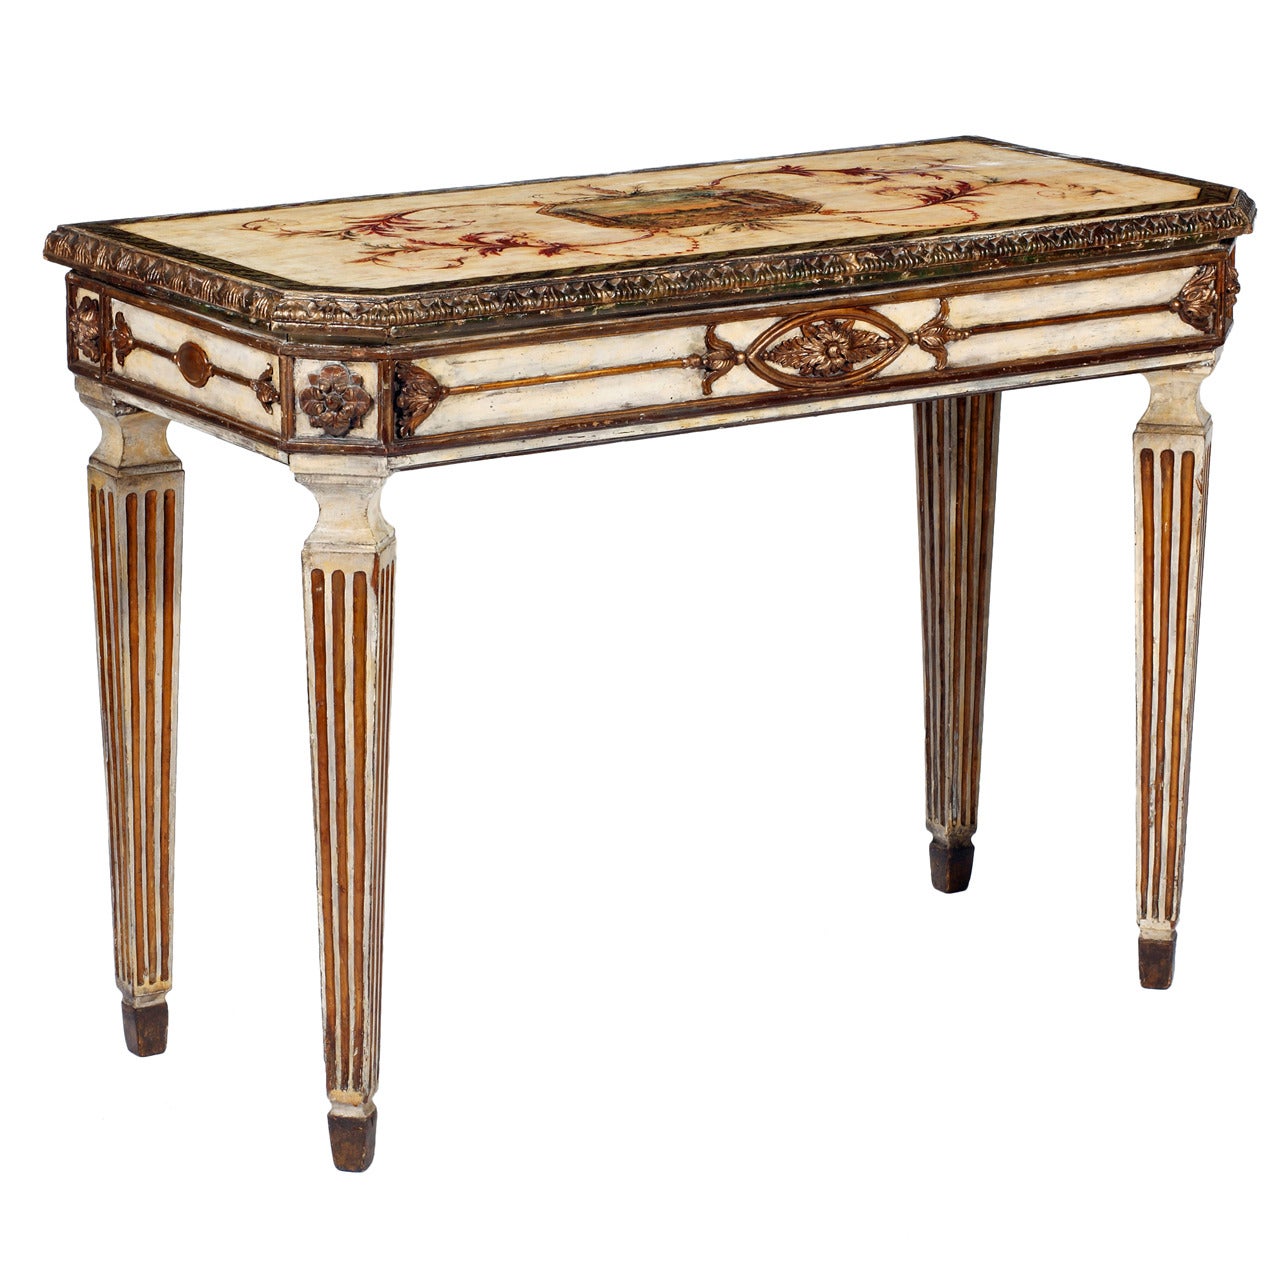 An Italian Piedmontese Neoclassical  Parcel Gilt Console, 18th/Early 19th c.